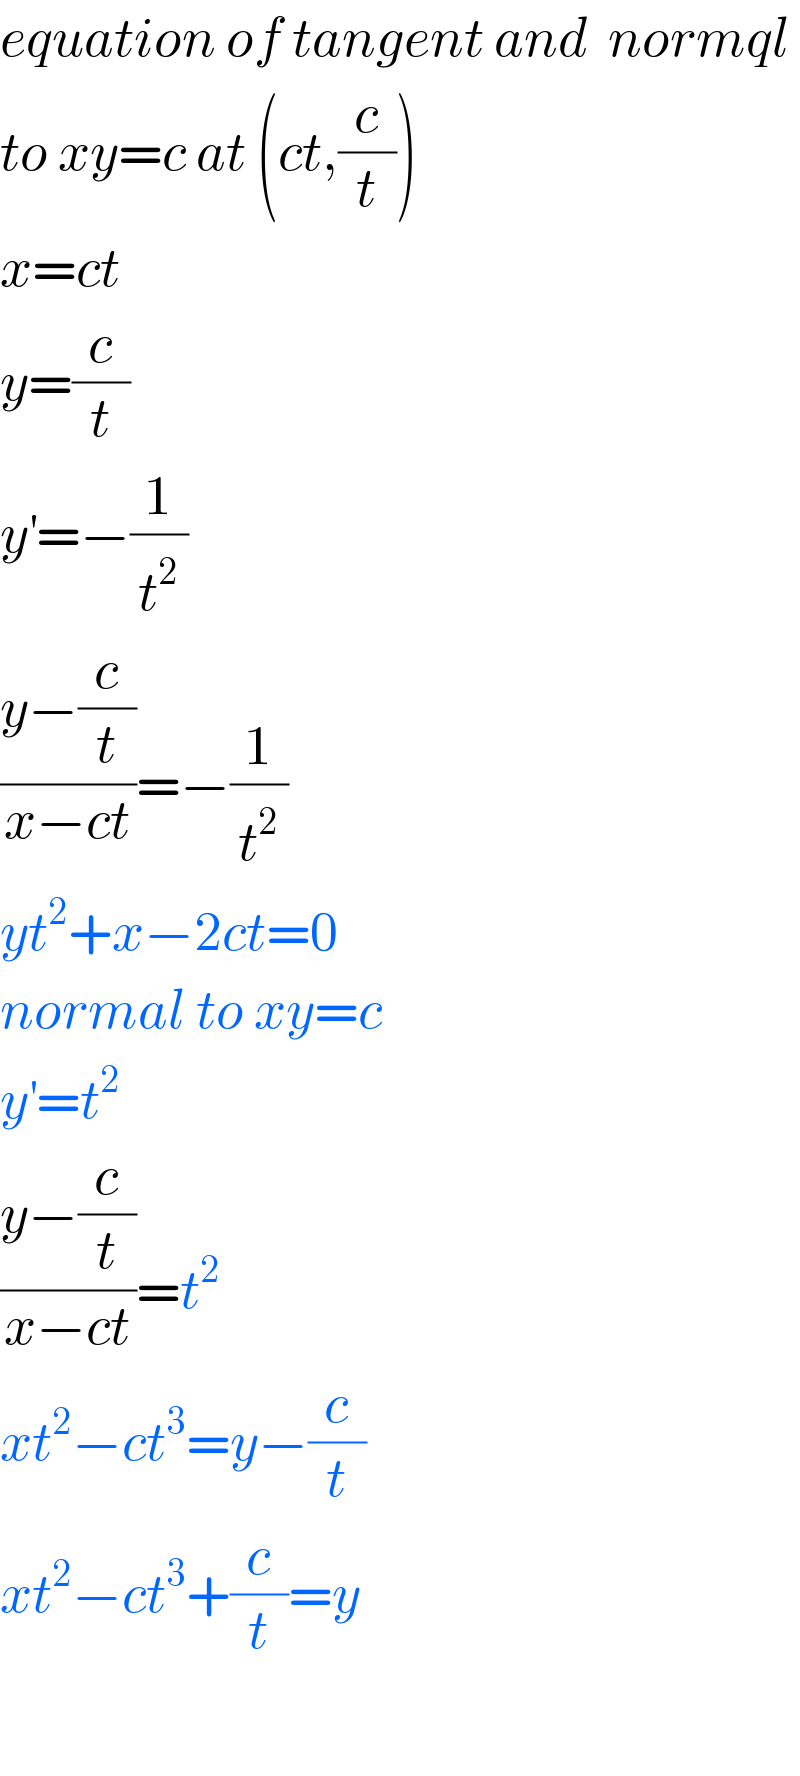 equation of tangent and  normql  to xy=c at (ct,(c/t))  x=ct  y=(c/t)  y^′ =−(1/t^2 )  ((y−(c/t))/(x−ct))=−(1/t^2 )  yt^2 +x−2ct=0  normal to xy=c  y^′ =t^2   ((y−(c/t))/(x−ct))=t^2   xt^2 −ct^3 =y−(c/t)  xt^2 −ct^3 +(c/t)=y    